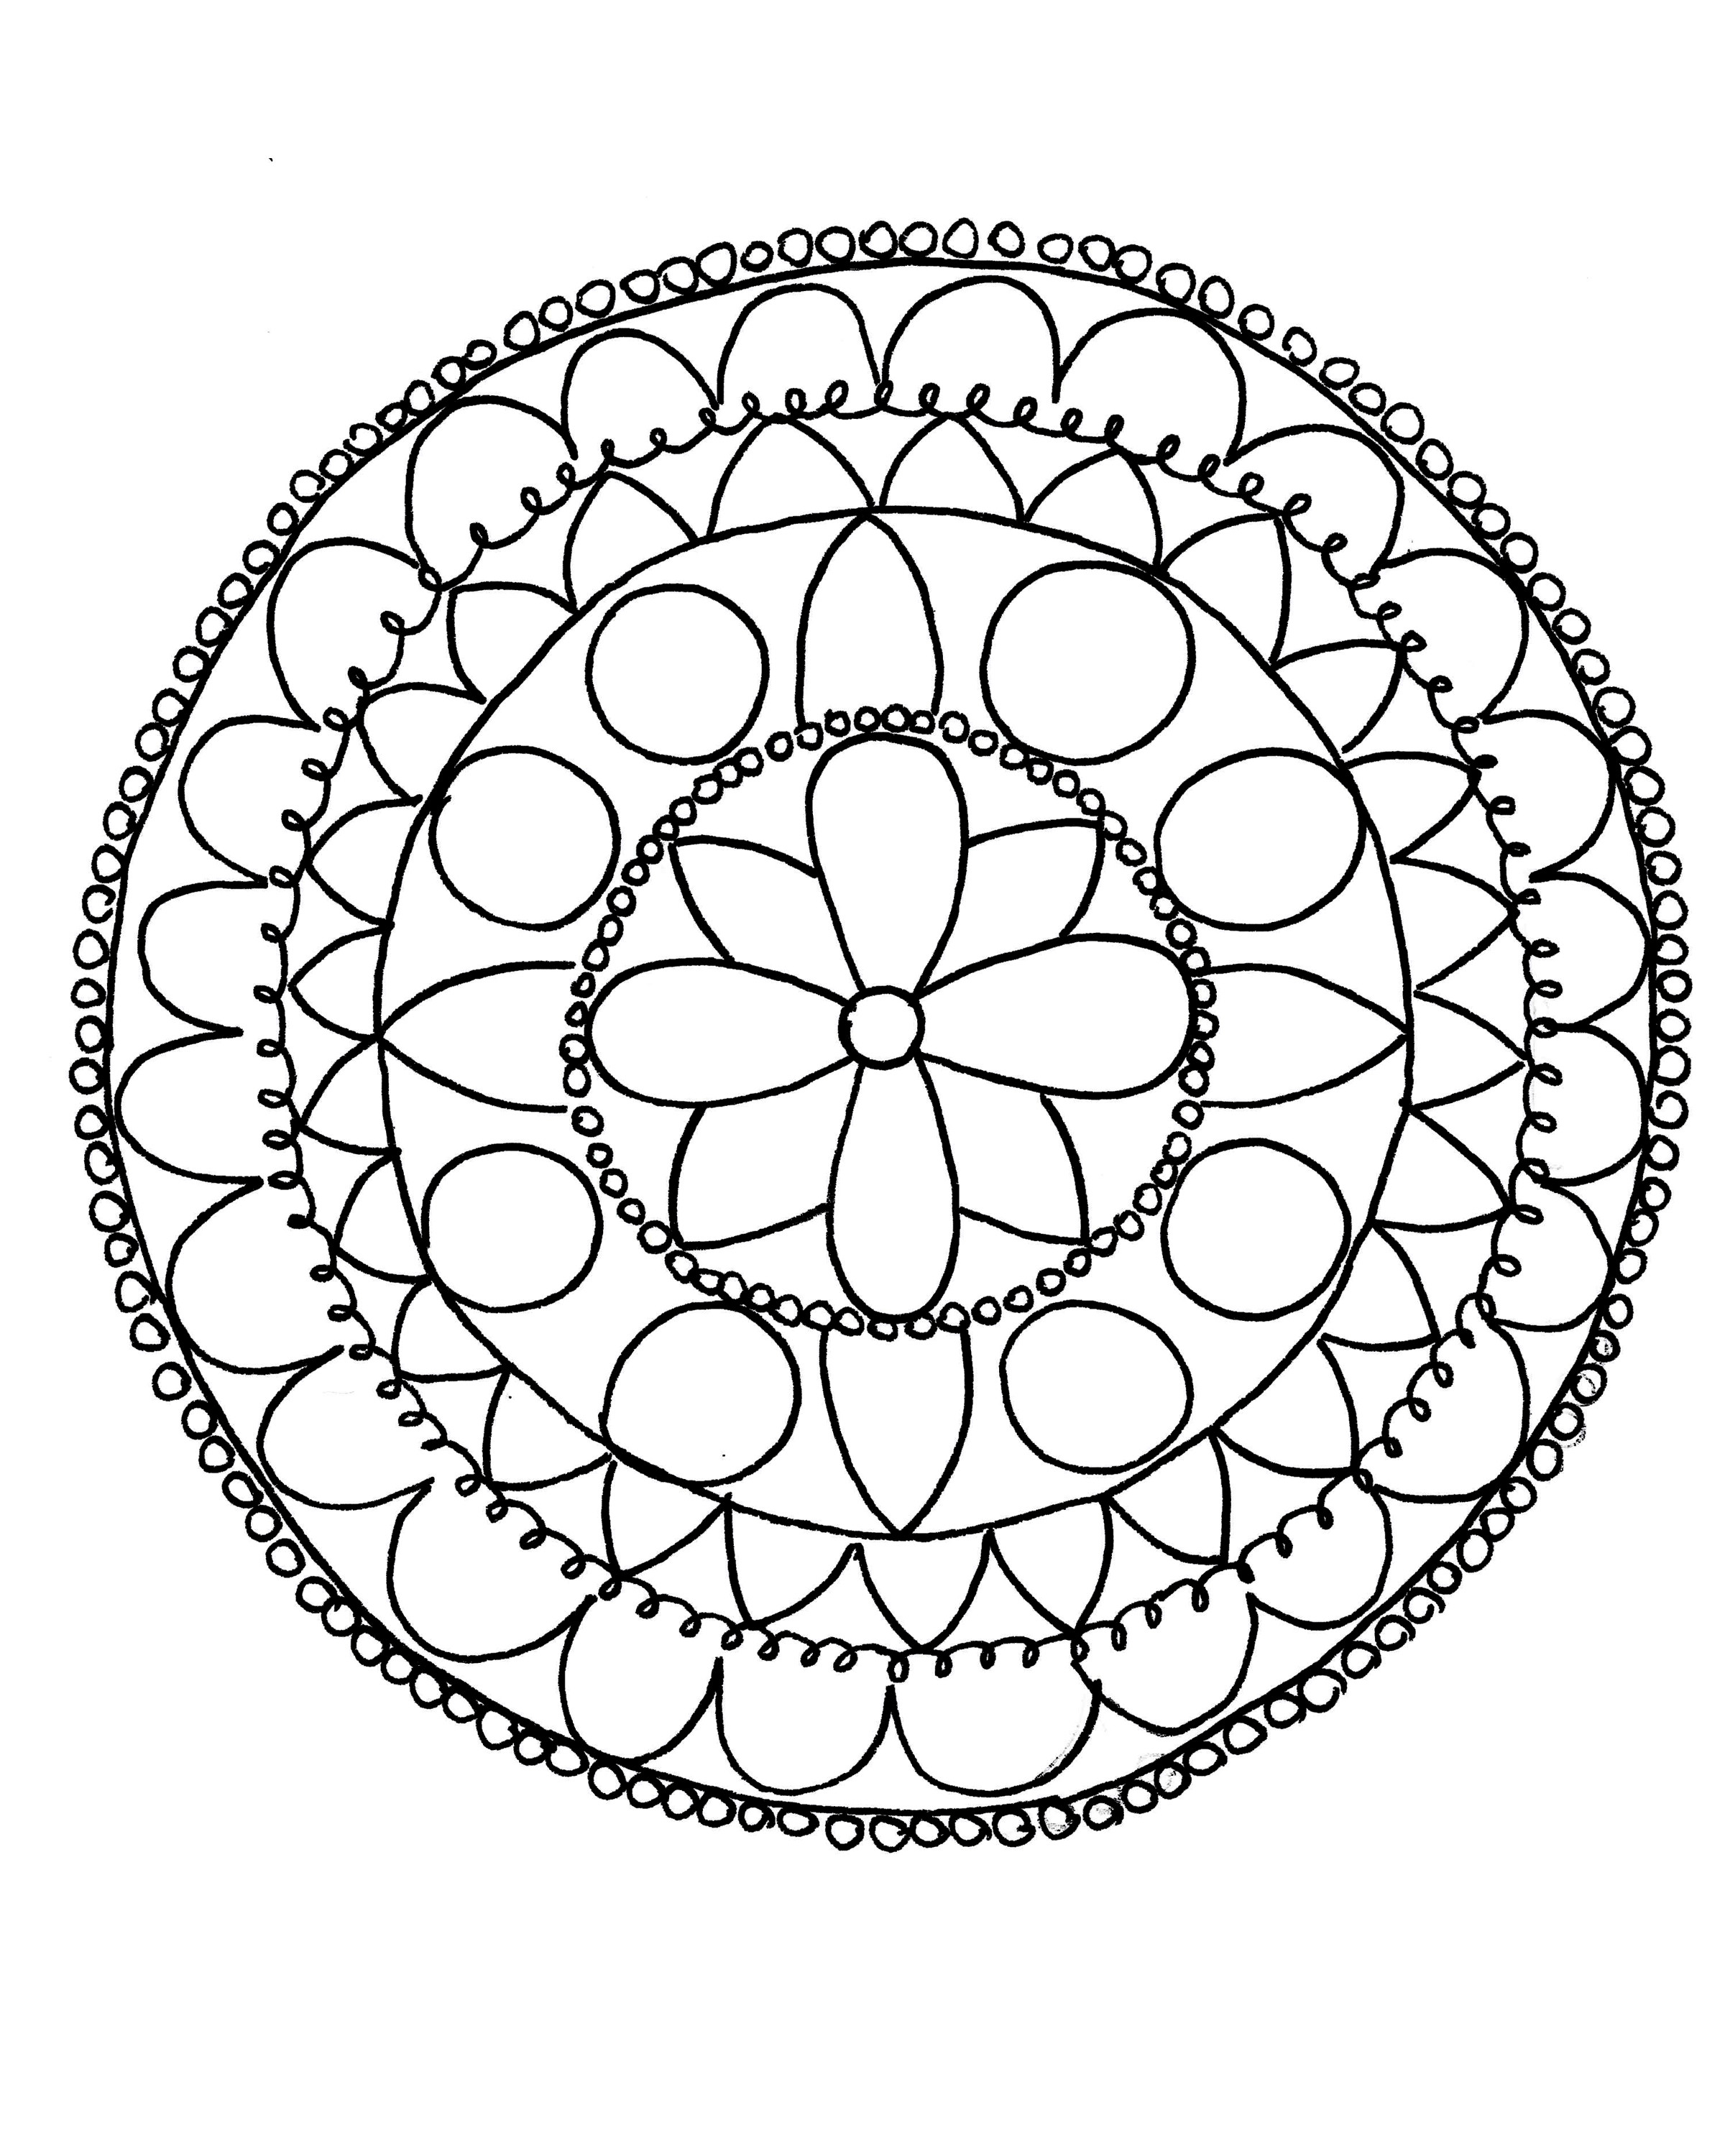 Mandala Art Coloring Pages
 How to Draw a Mandala With FREE Coloring Pages